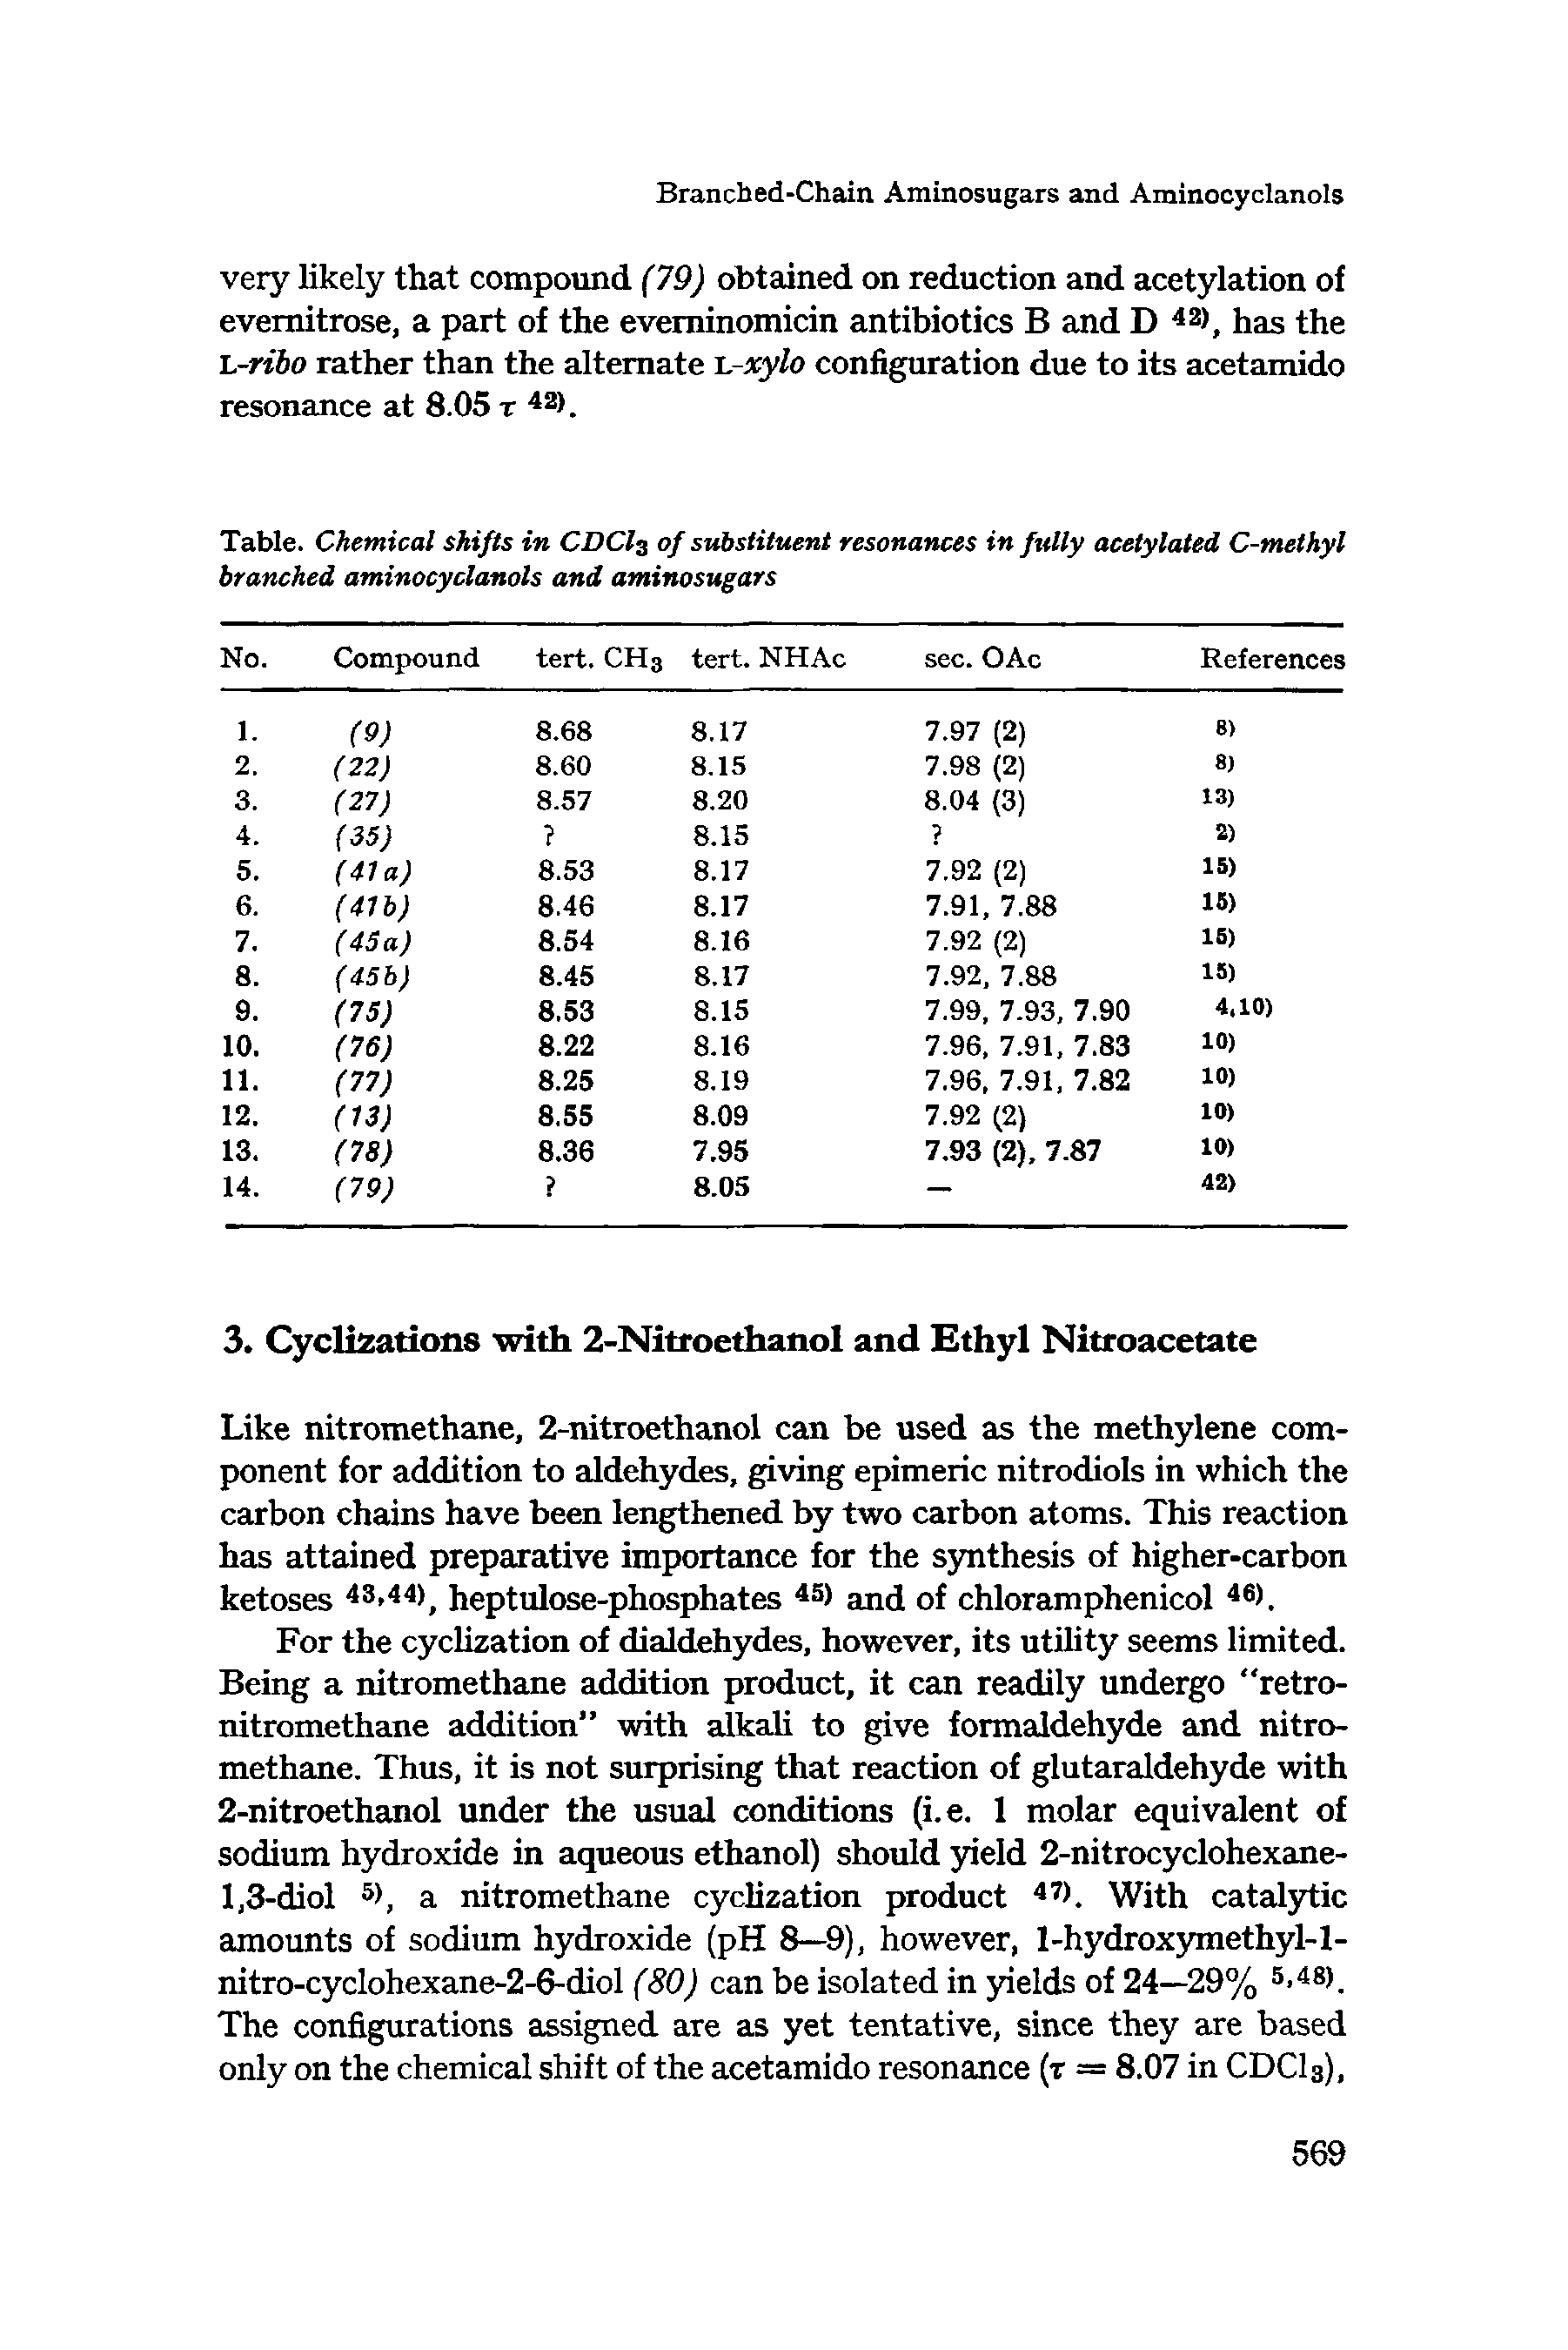 Table. Chemical shifts in CDCI3 of substituent resonances in fully acetylated C-methyl branched aminocyclanols and aminosugars...